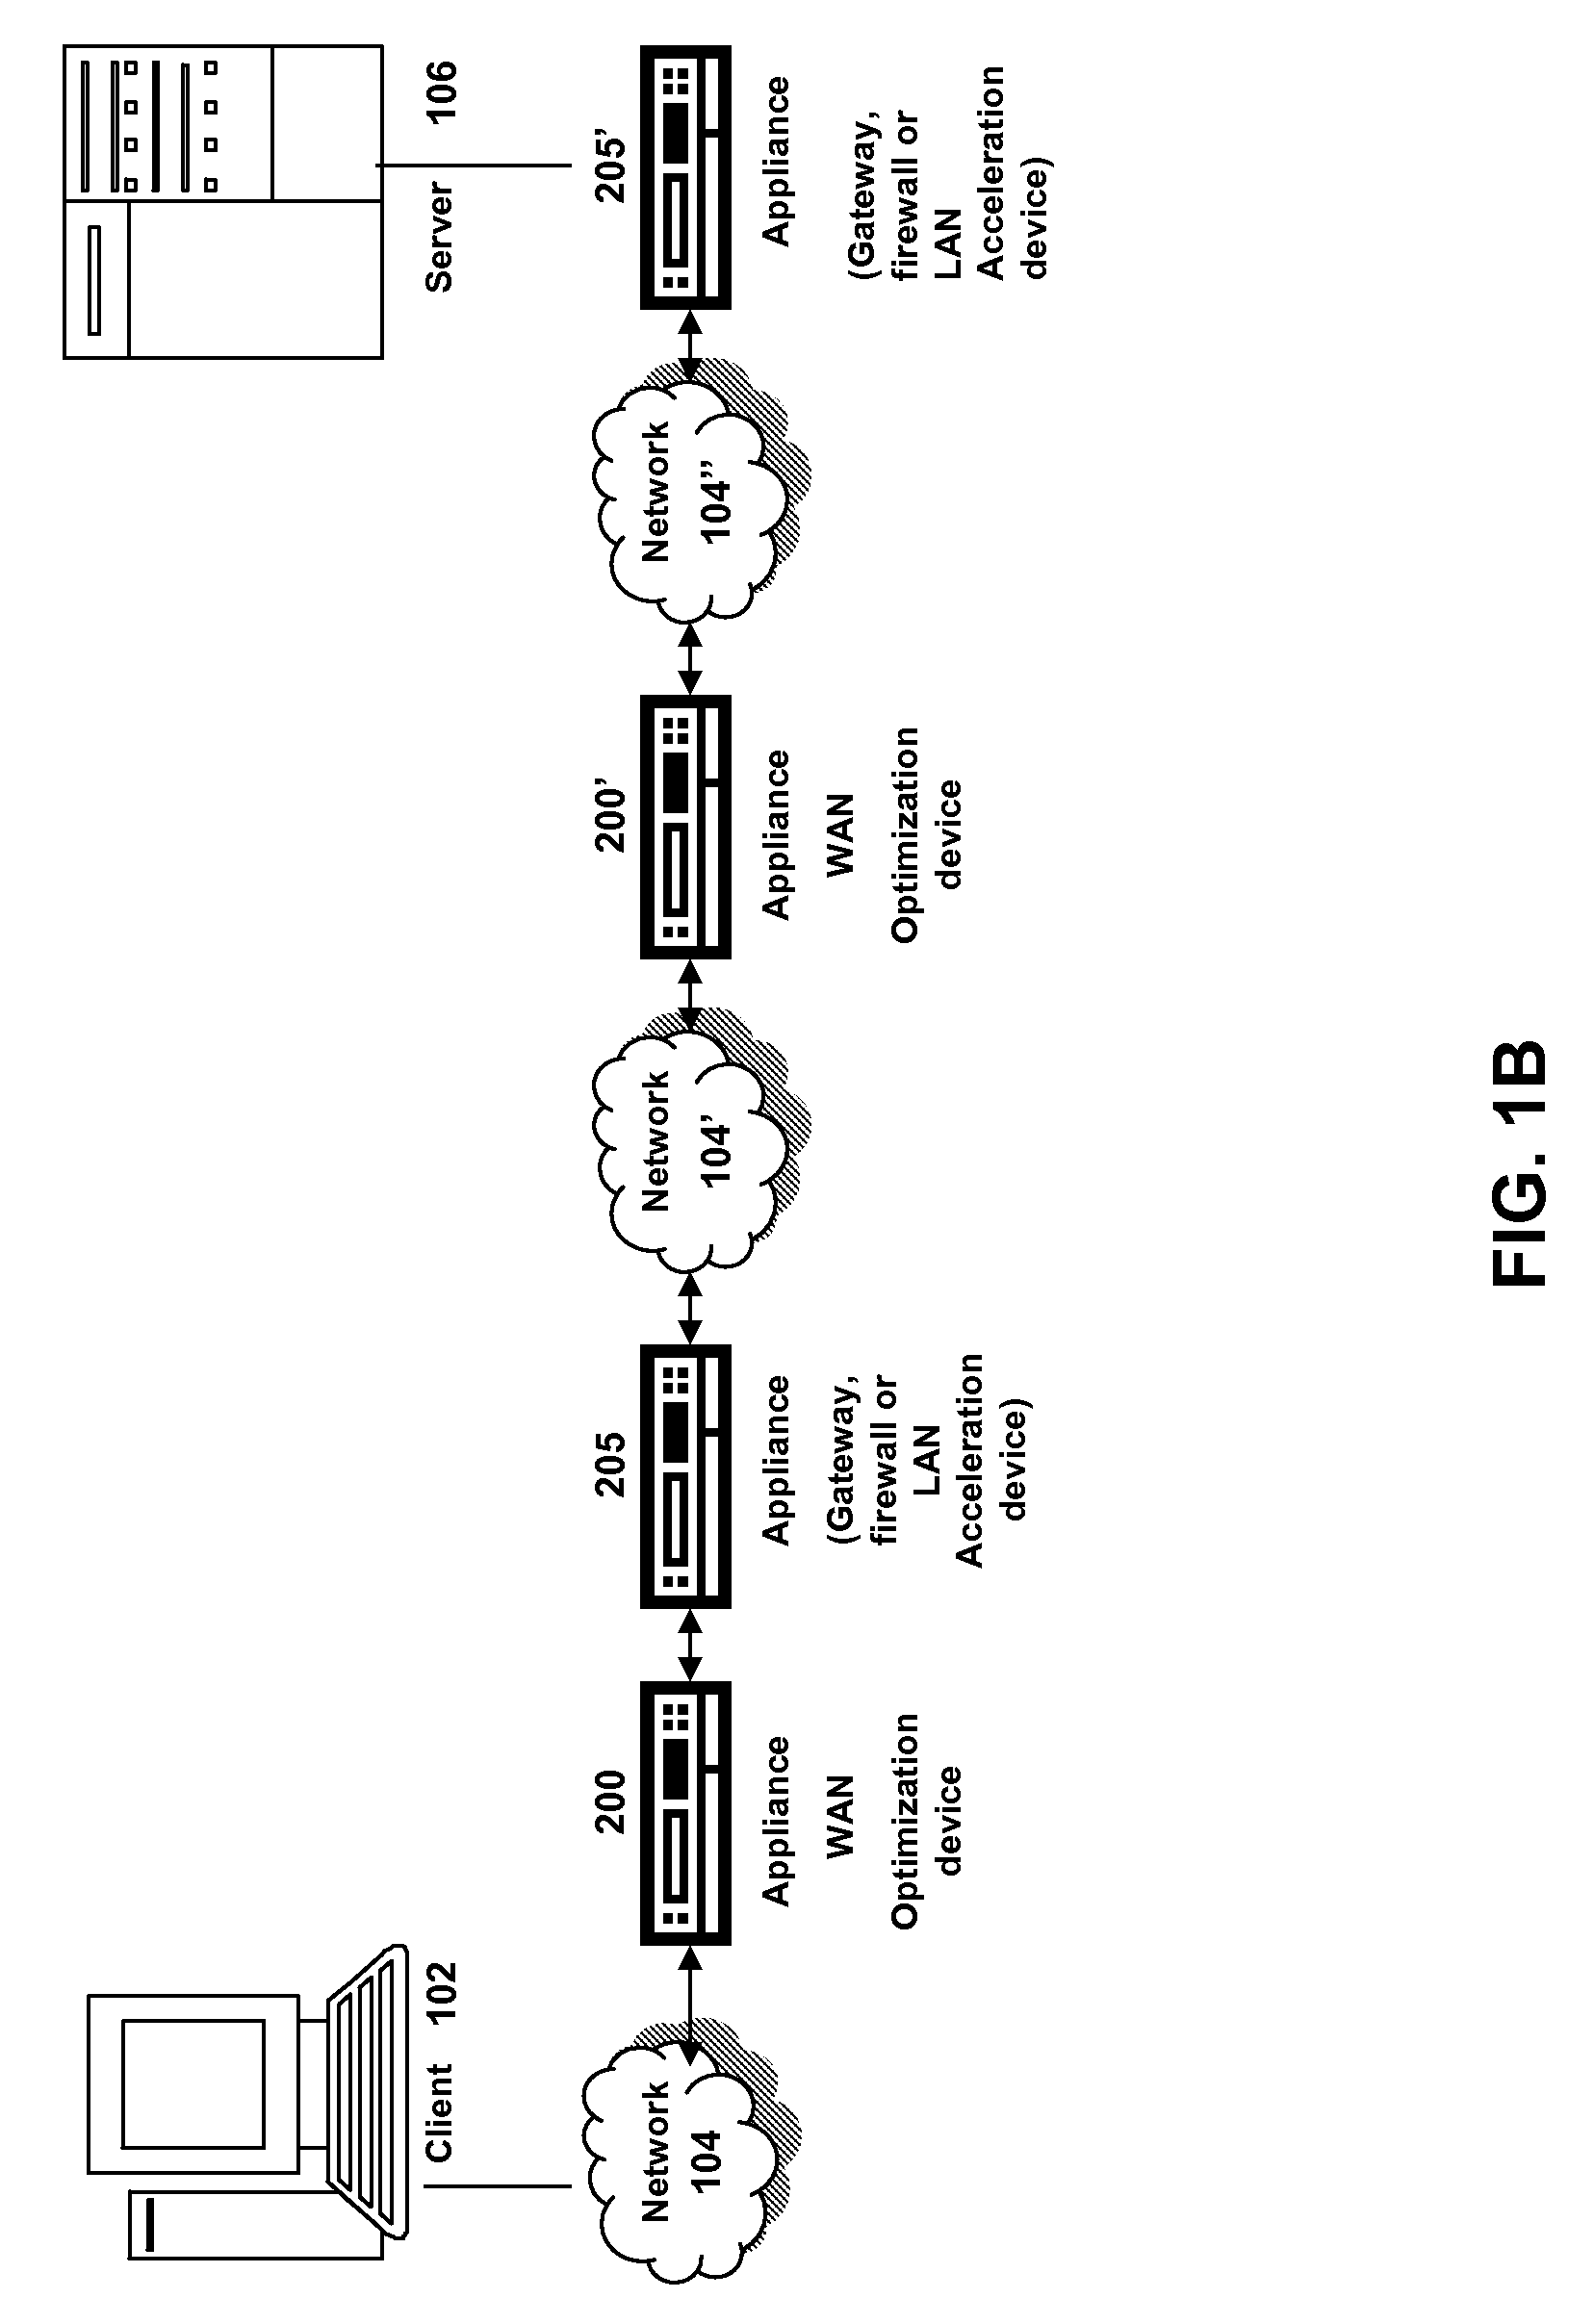 Systems and methods for sharing compression histories between multiple devices